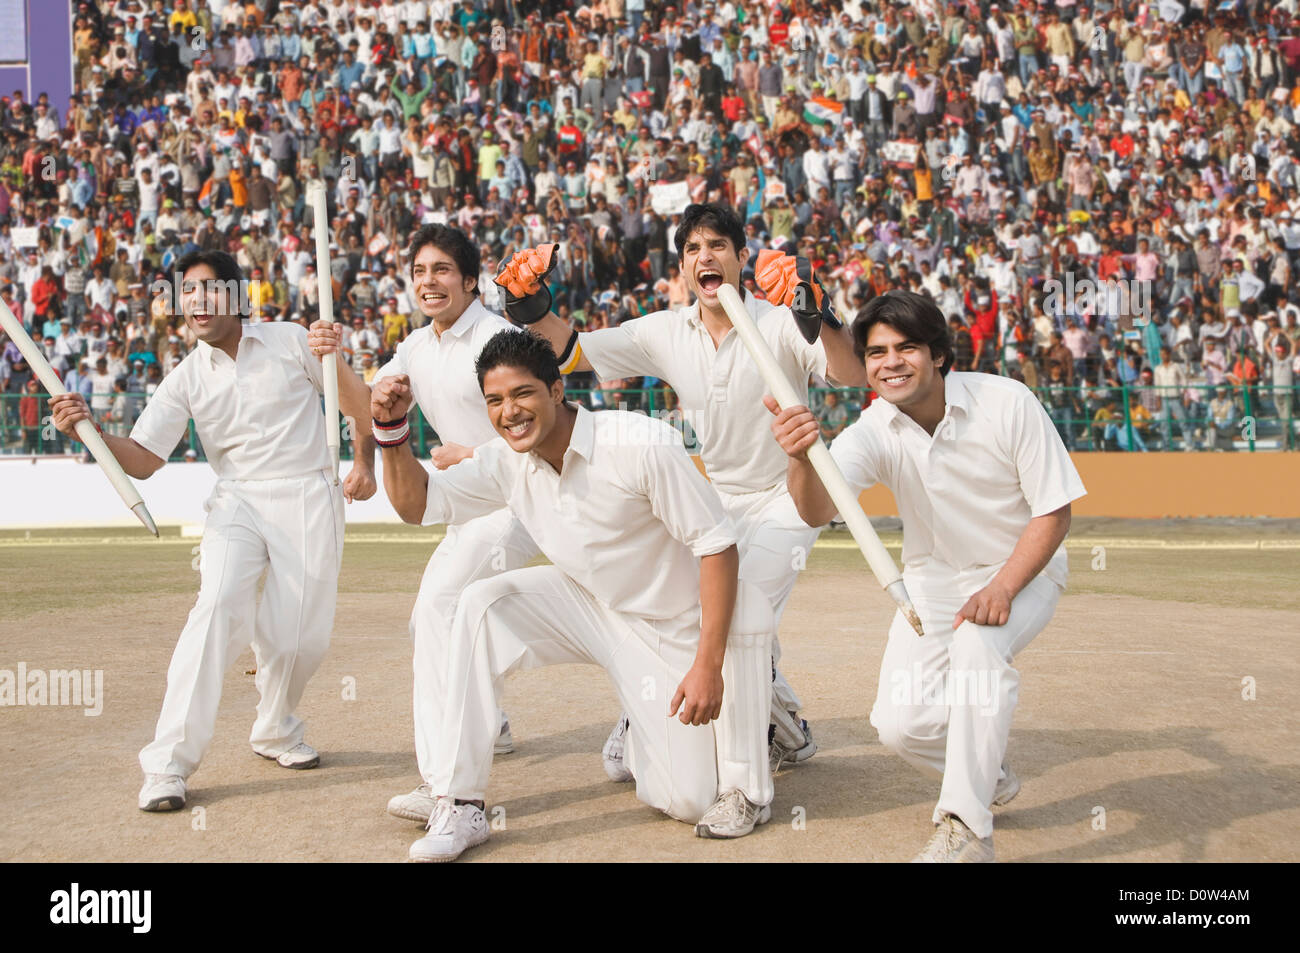 Cricket players celebrating their success Stock Photo